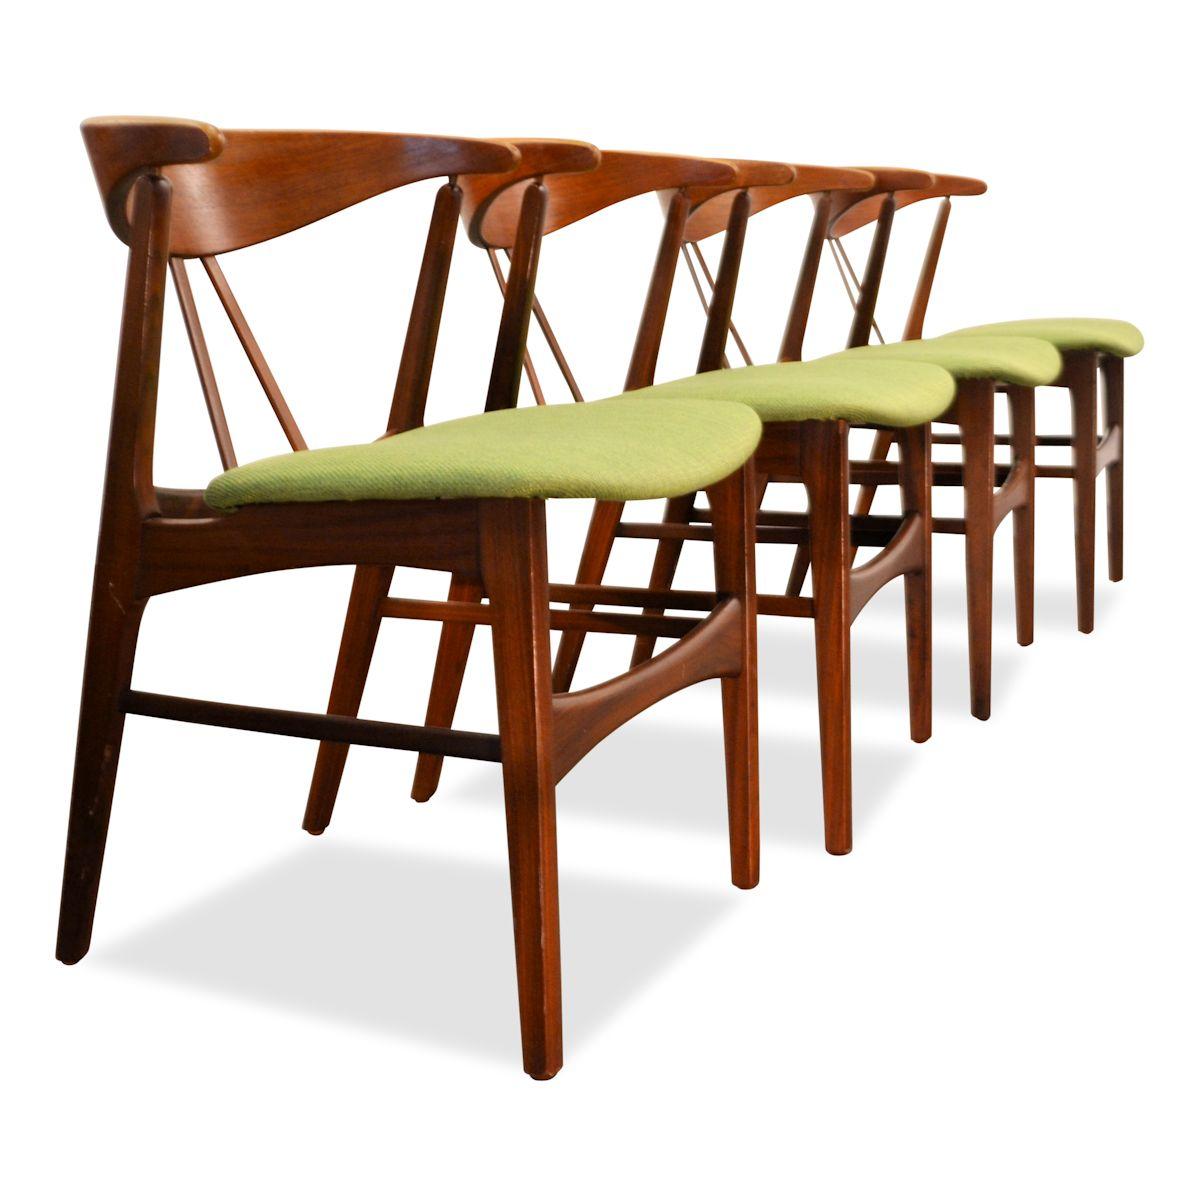 Set of four vintage Danish dining chairs designed in the 1960s. These elegantly designed teak and oakwood chairs are clearly inspired by the Hans Wegner “Wishbone chair”. Featuring characteristic organic curved backrests, excellent seating comfort